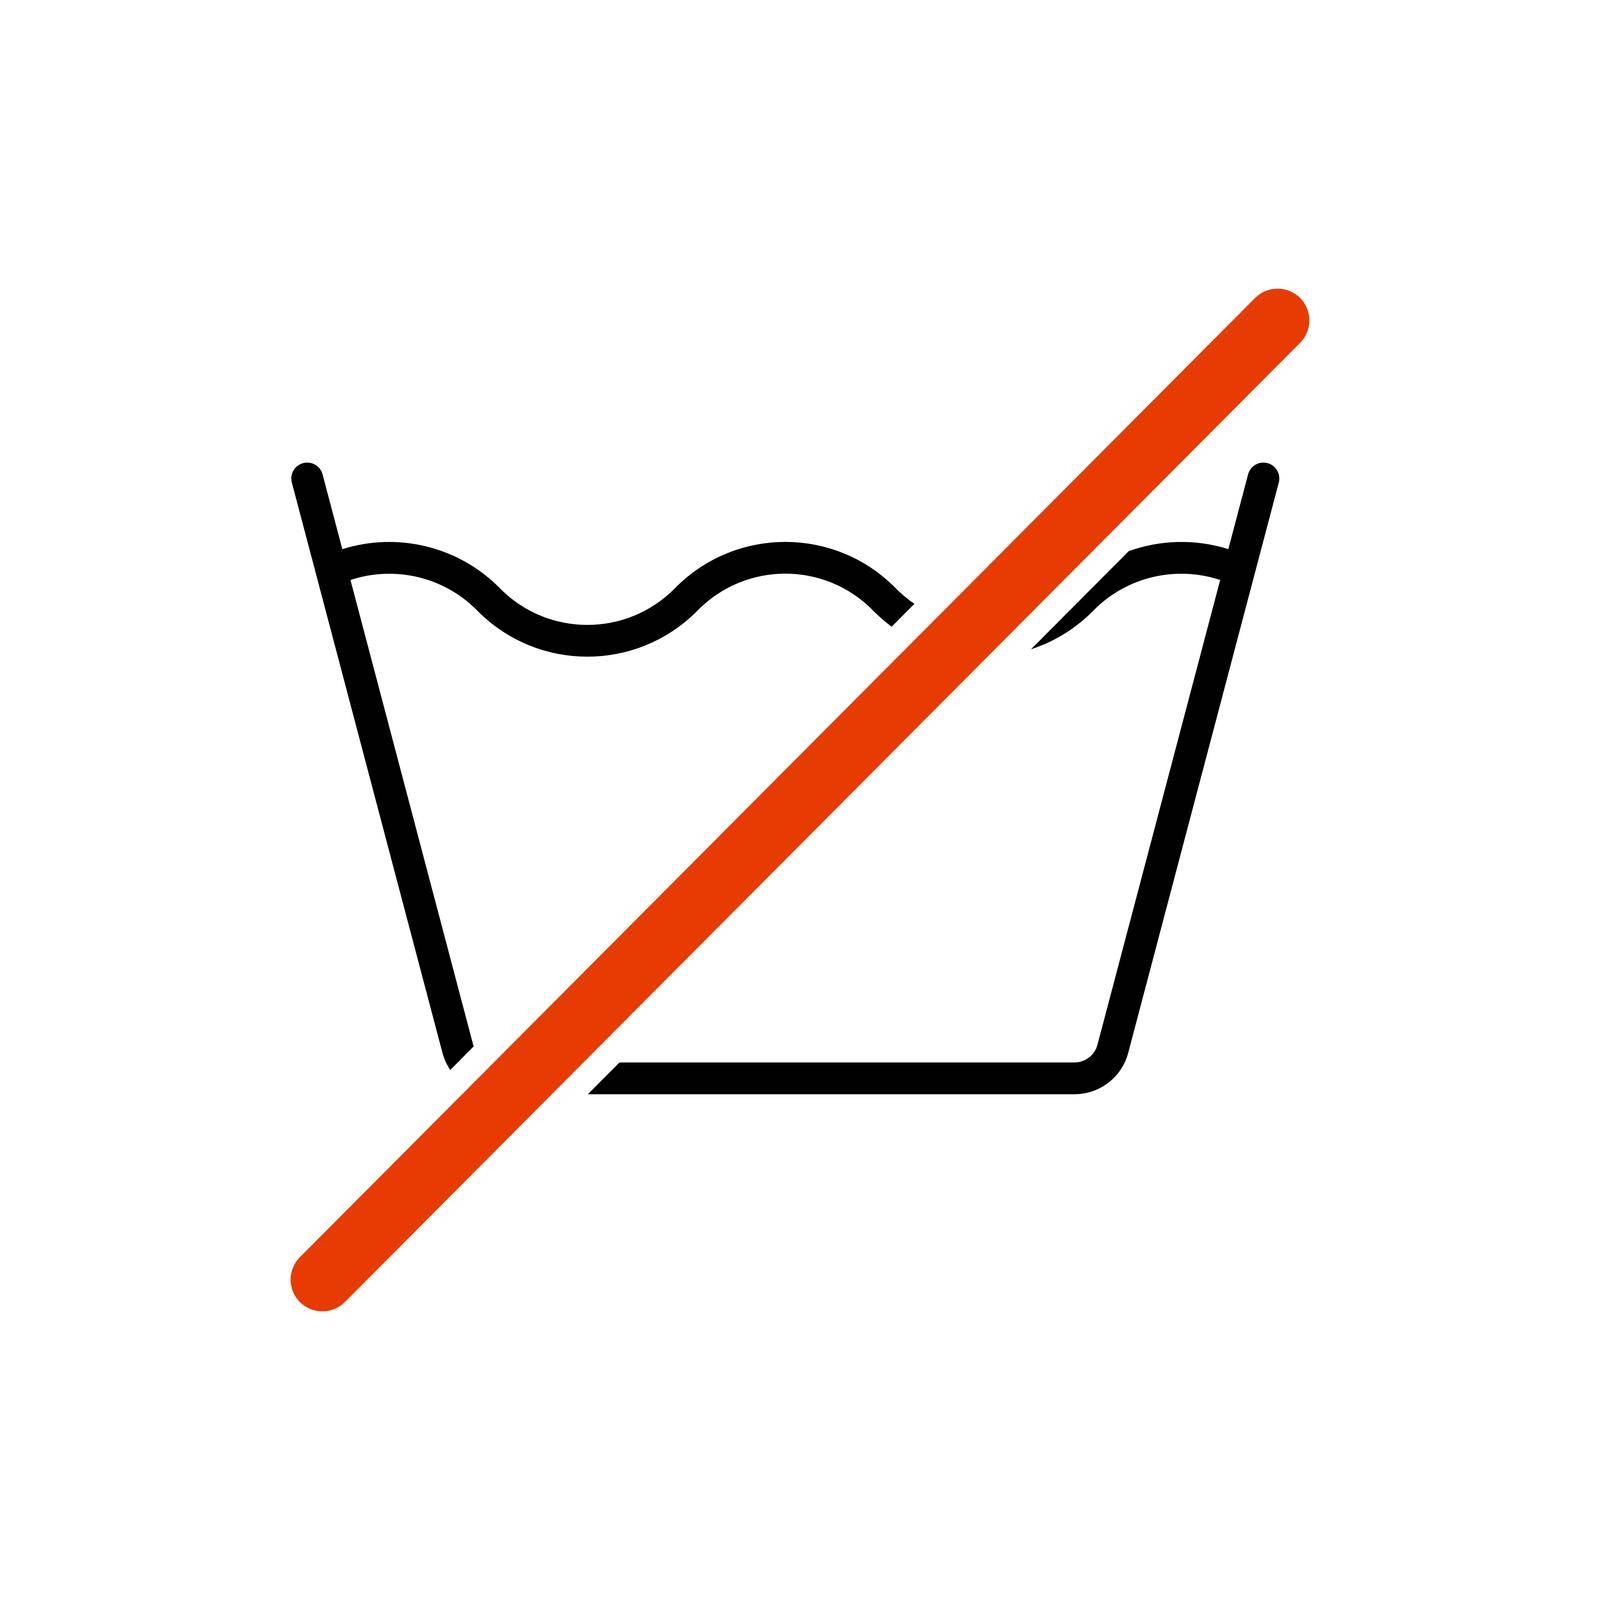 Do not wash icon. Black linear icon. Isolated wash icon. Vector illustration.